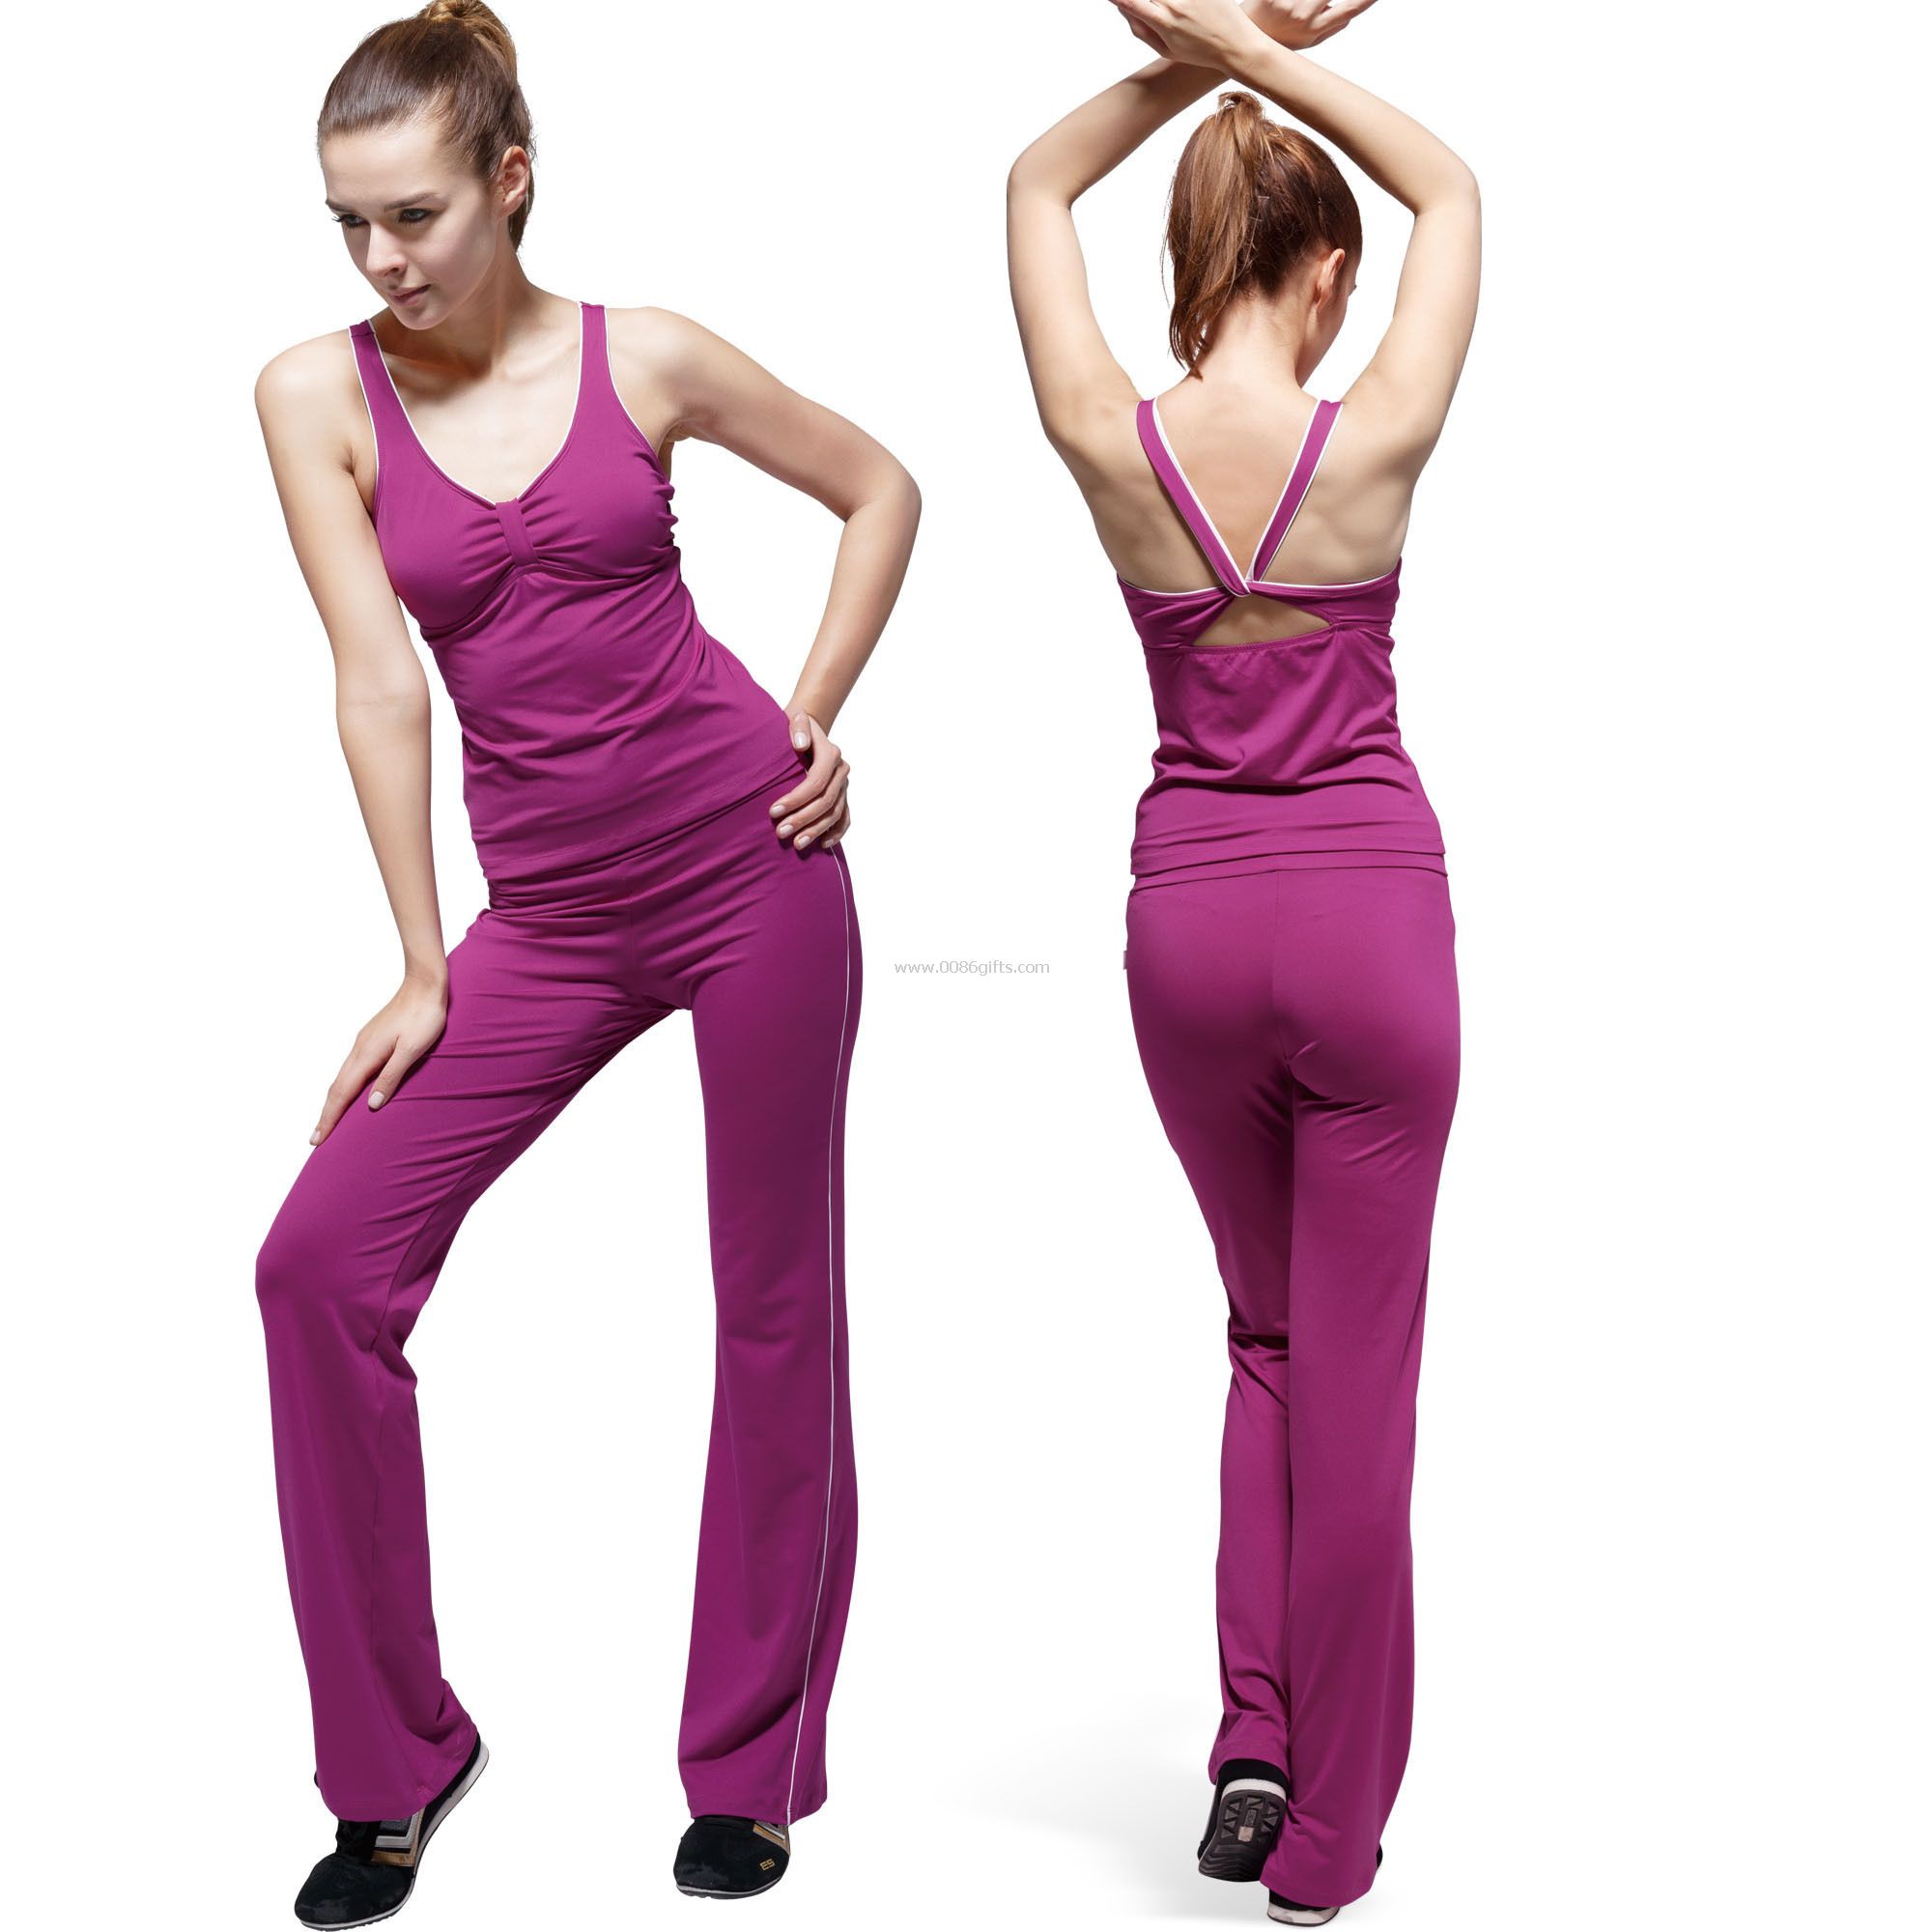 Spandex / Cotton Womens Fitness Wear Tight Breathable With Deep V-Neck Design